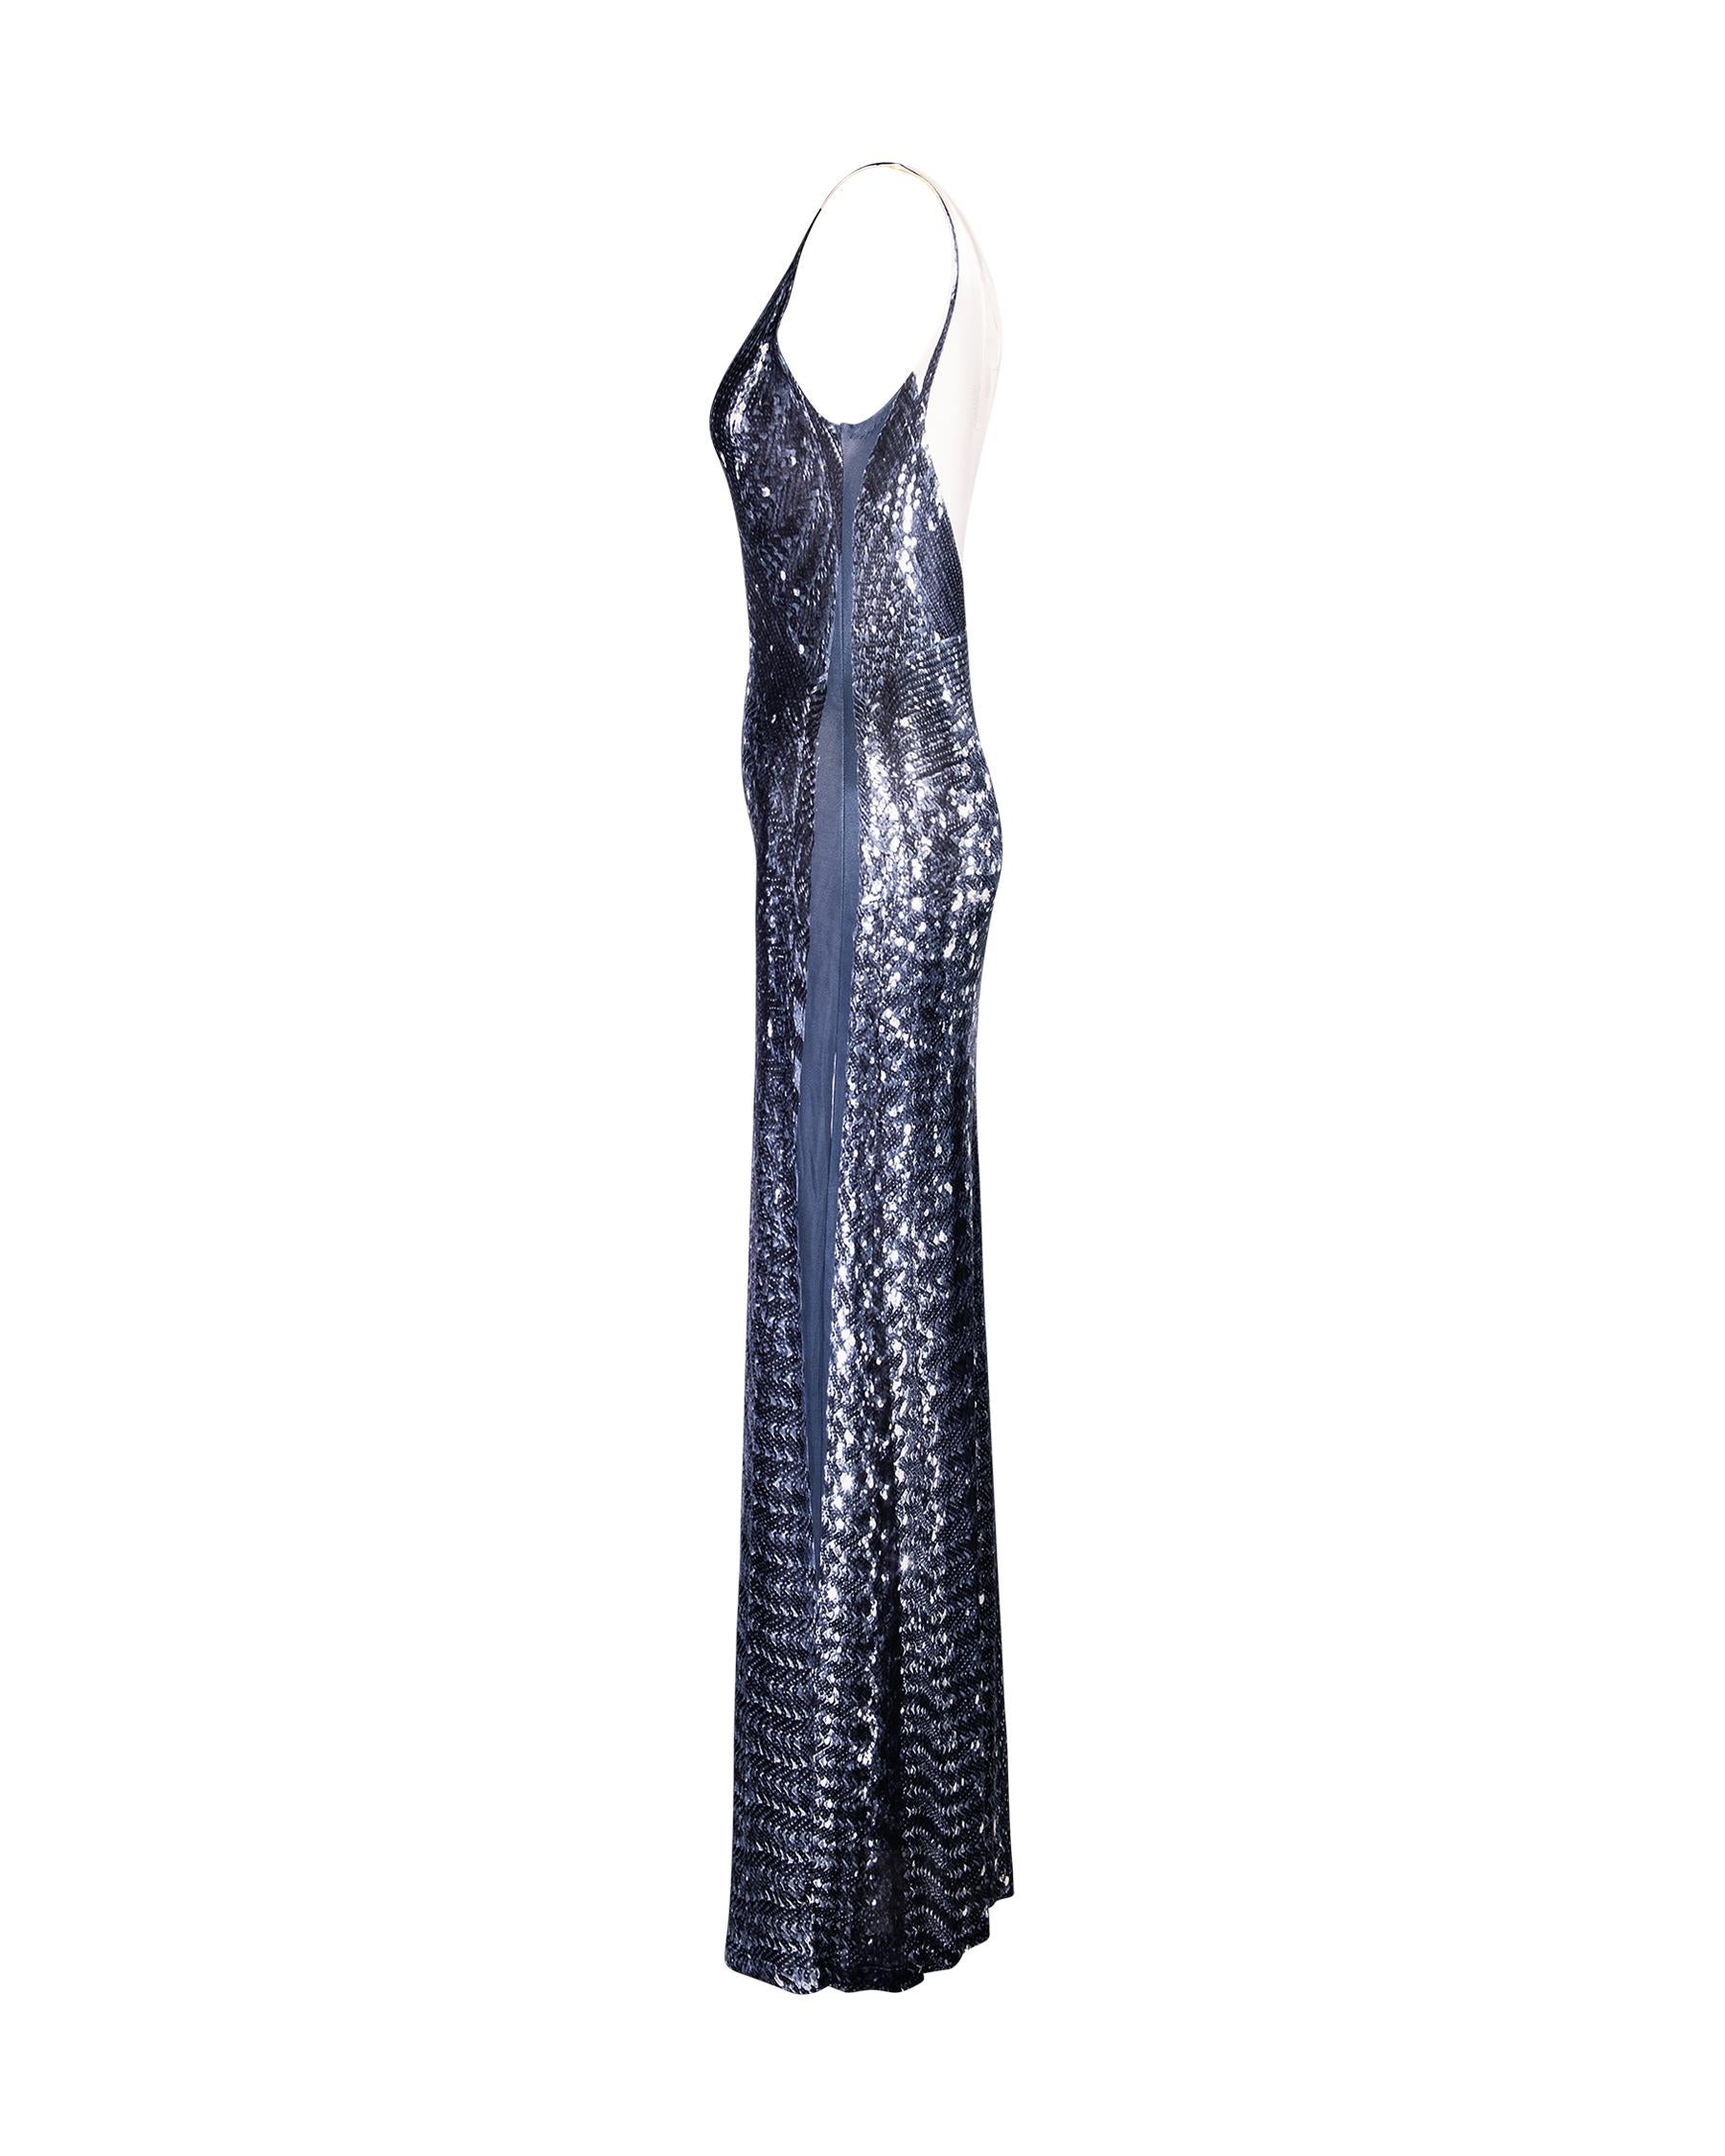 S/S 1996 Maison Martin Margiela Sequin Print Trompe L'Oeil Maxi Dress In Good Condition In North Hollywood, CA